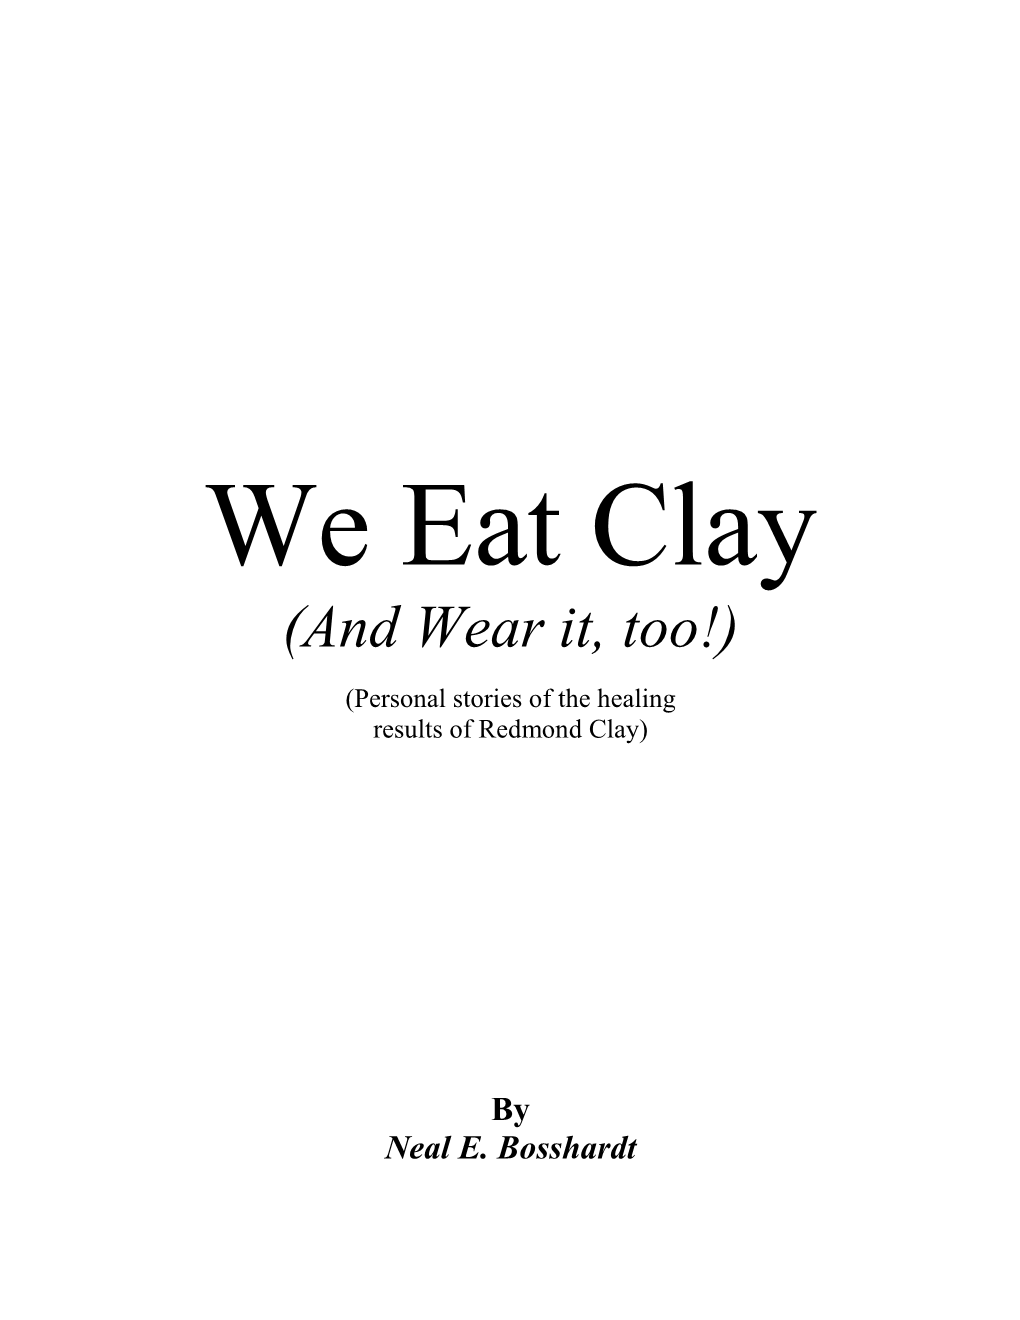 We Eat Clay (And Wear It, Too!)